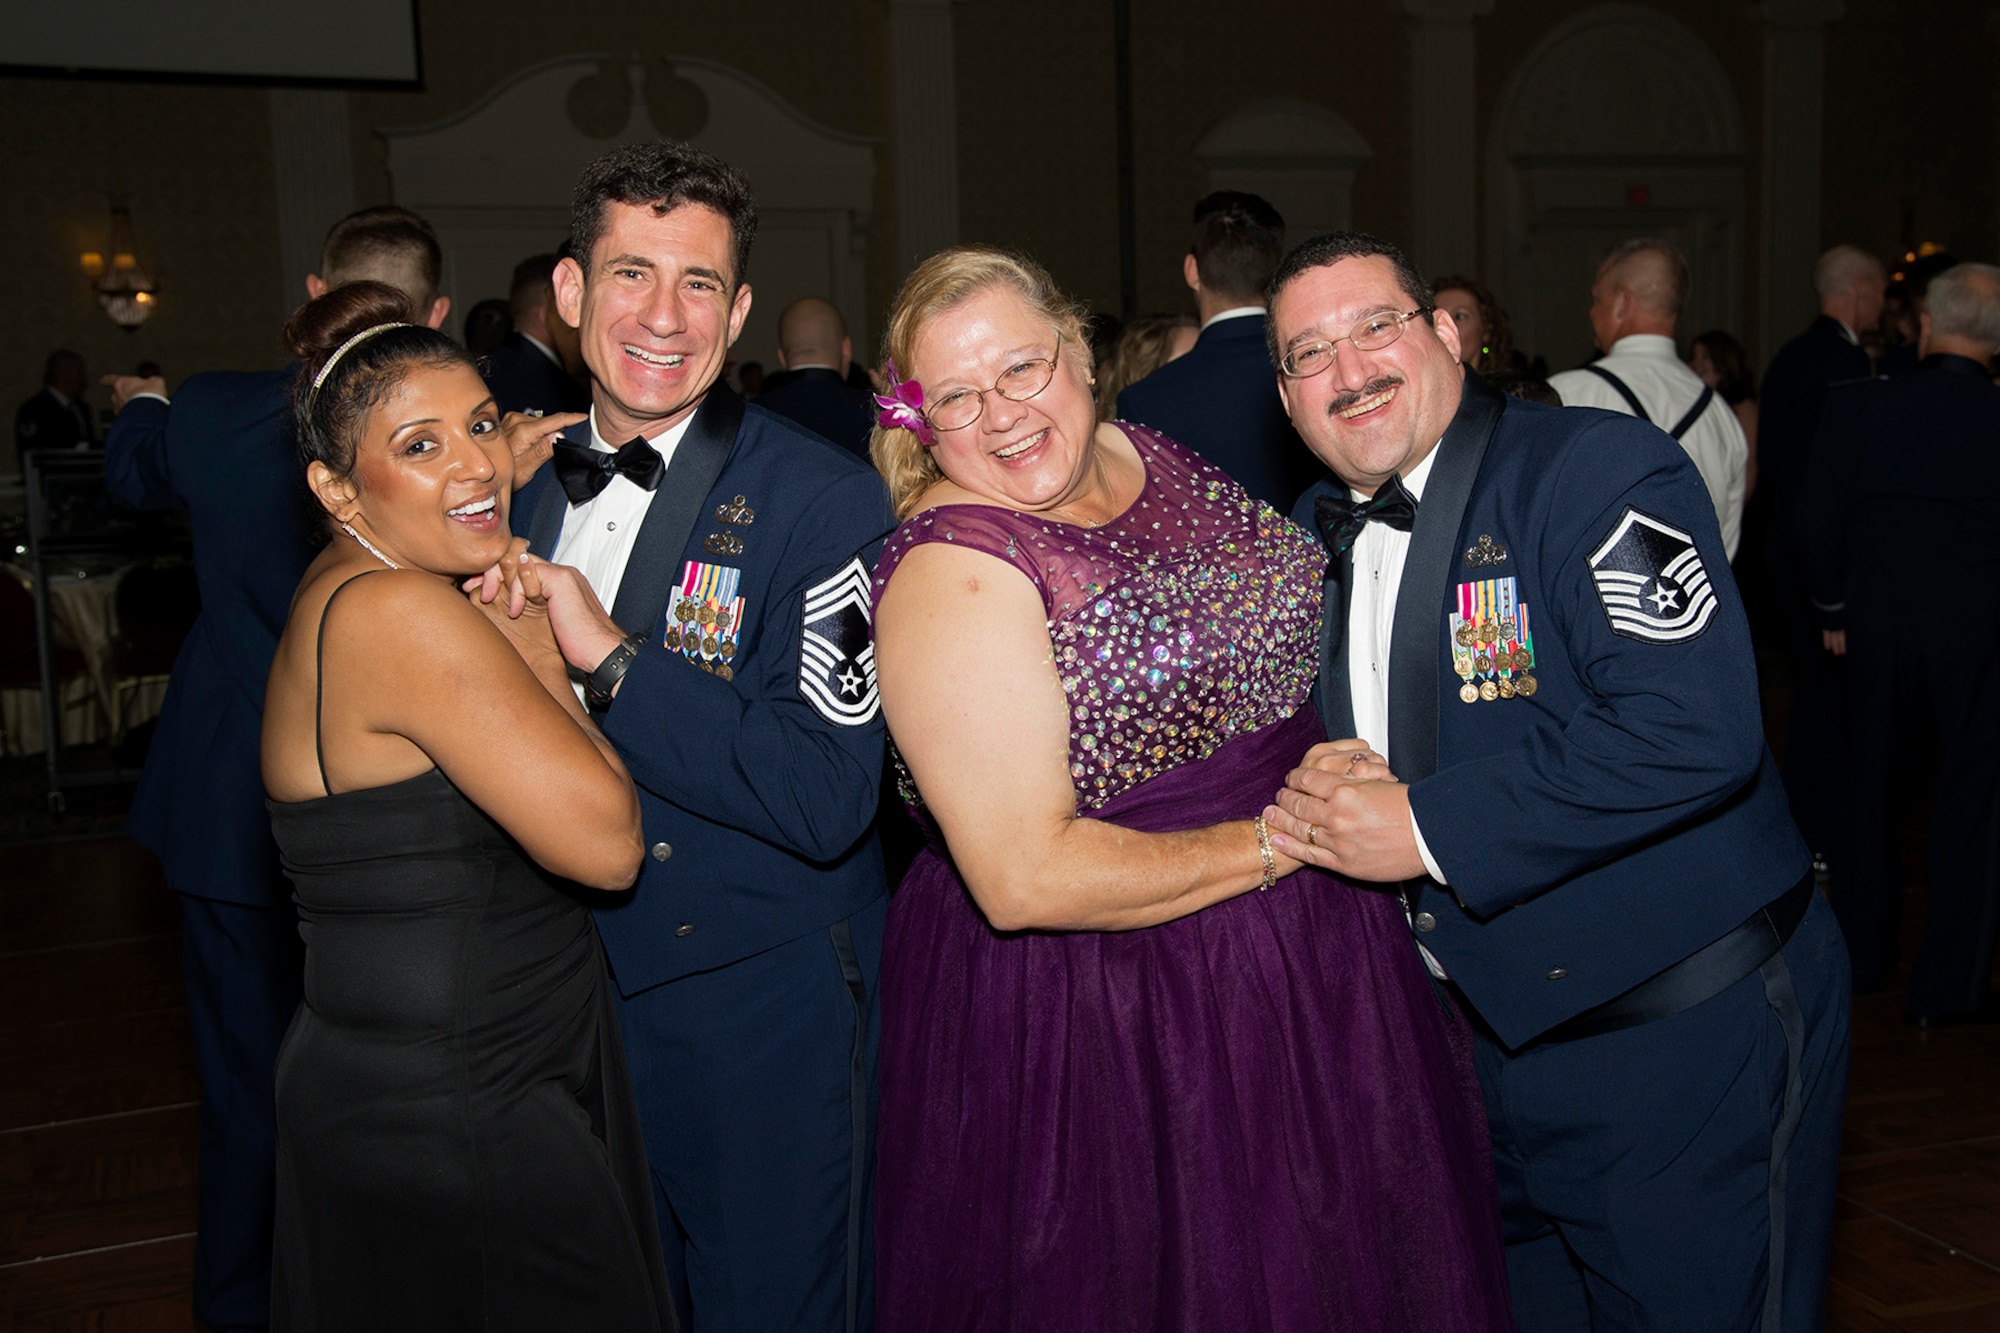 Members of Team Dover dance during the Air Force Ball Sept. 17, 2016, at Dover Downs in Dover, Del. The event featured dining, live music, a guest speaker and dancing. (U.S. Air Force photo by Senior Airman Aaron J. Jenne)